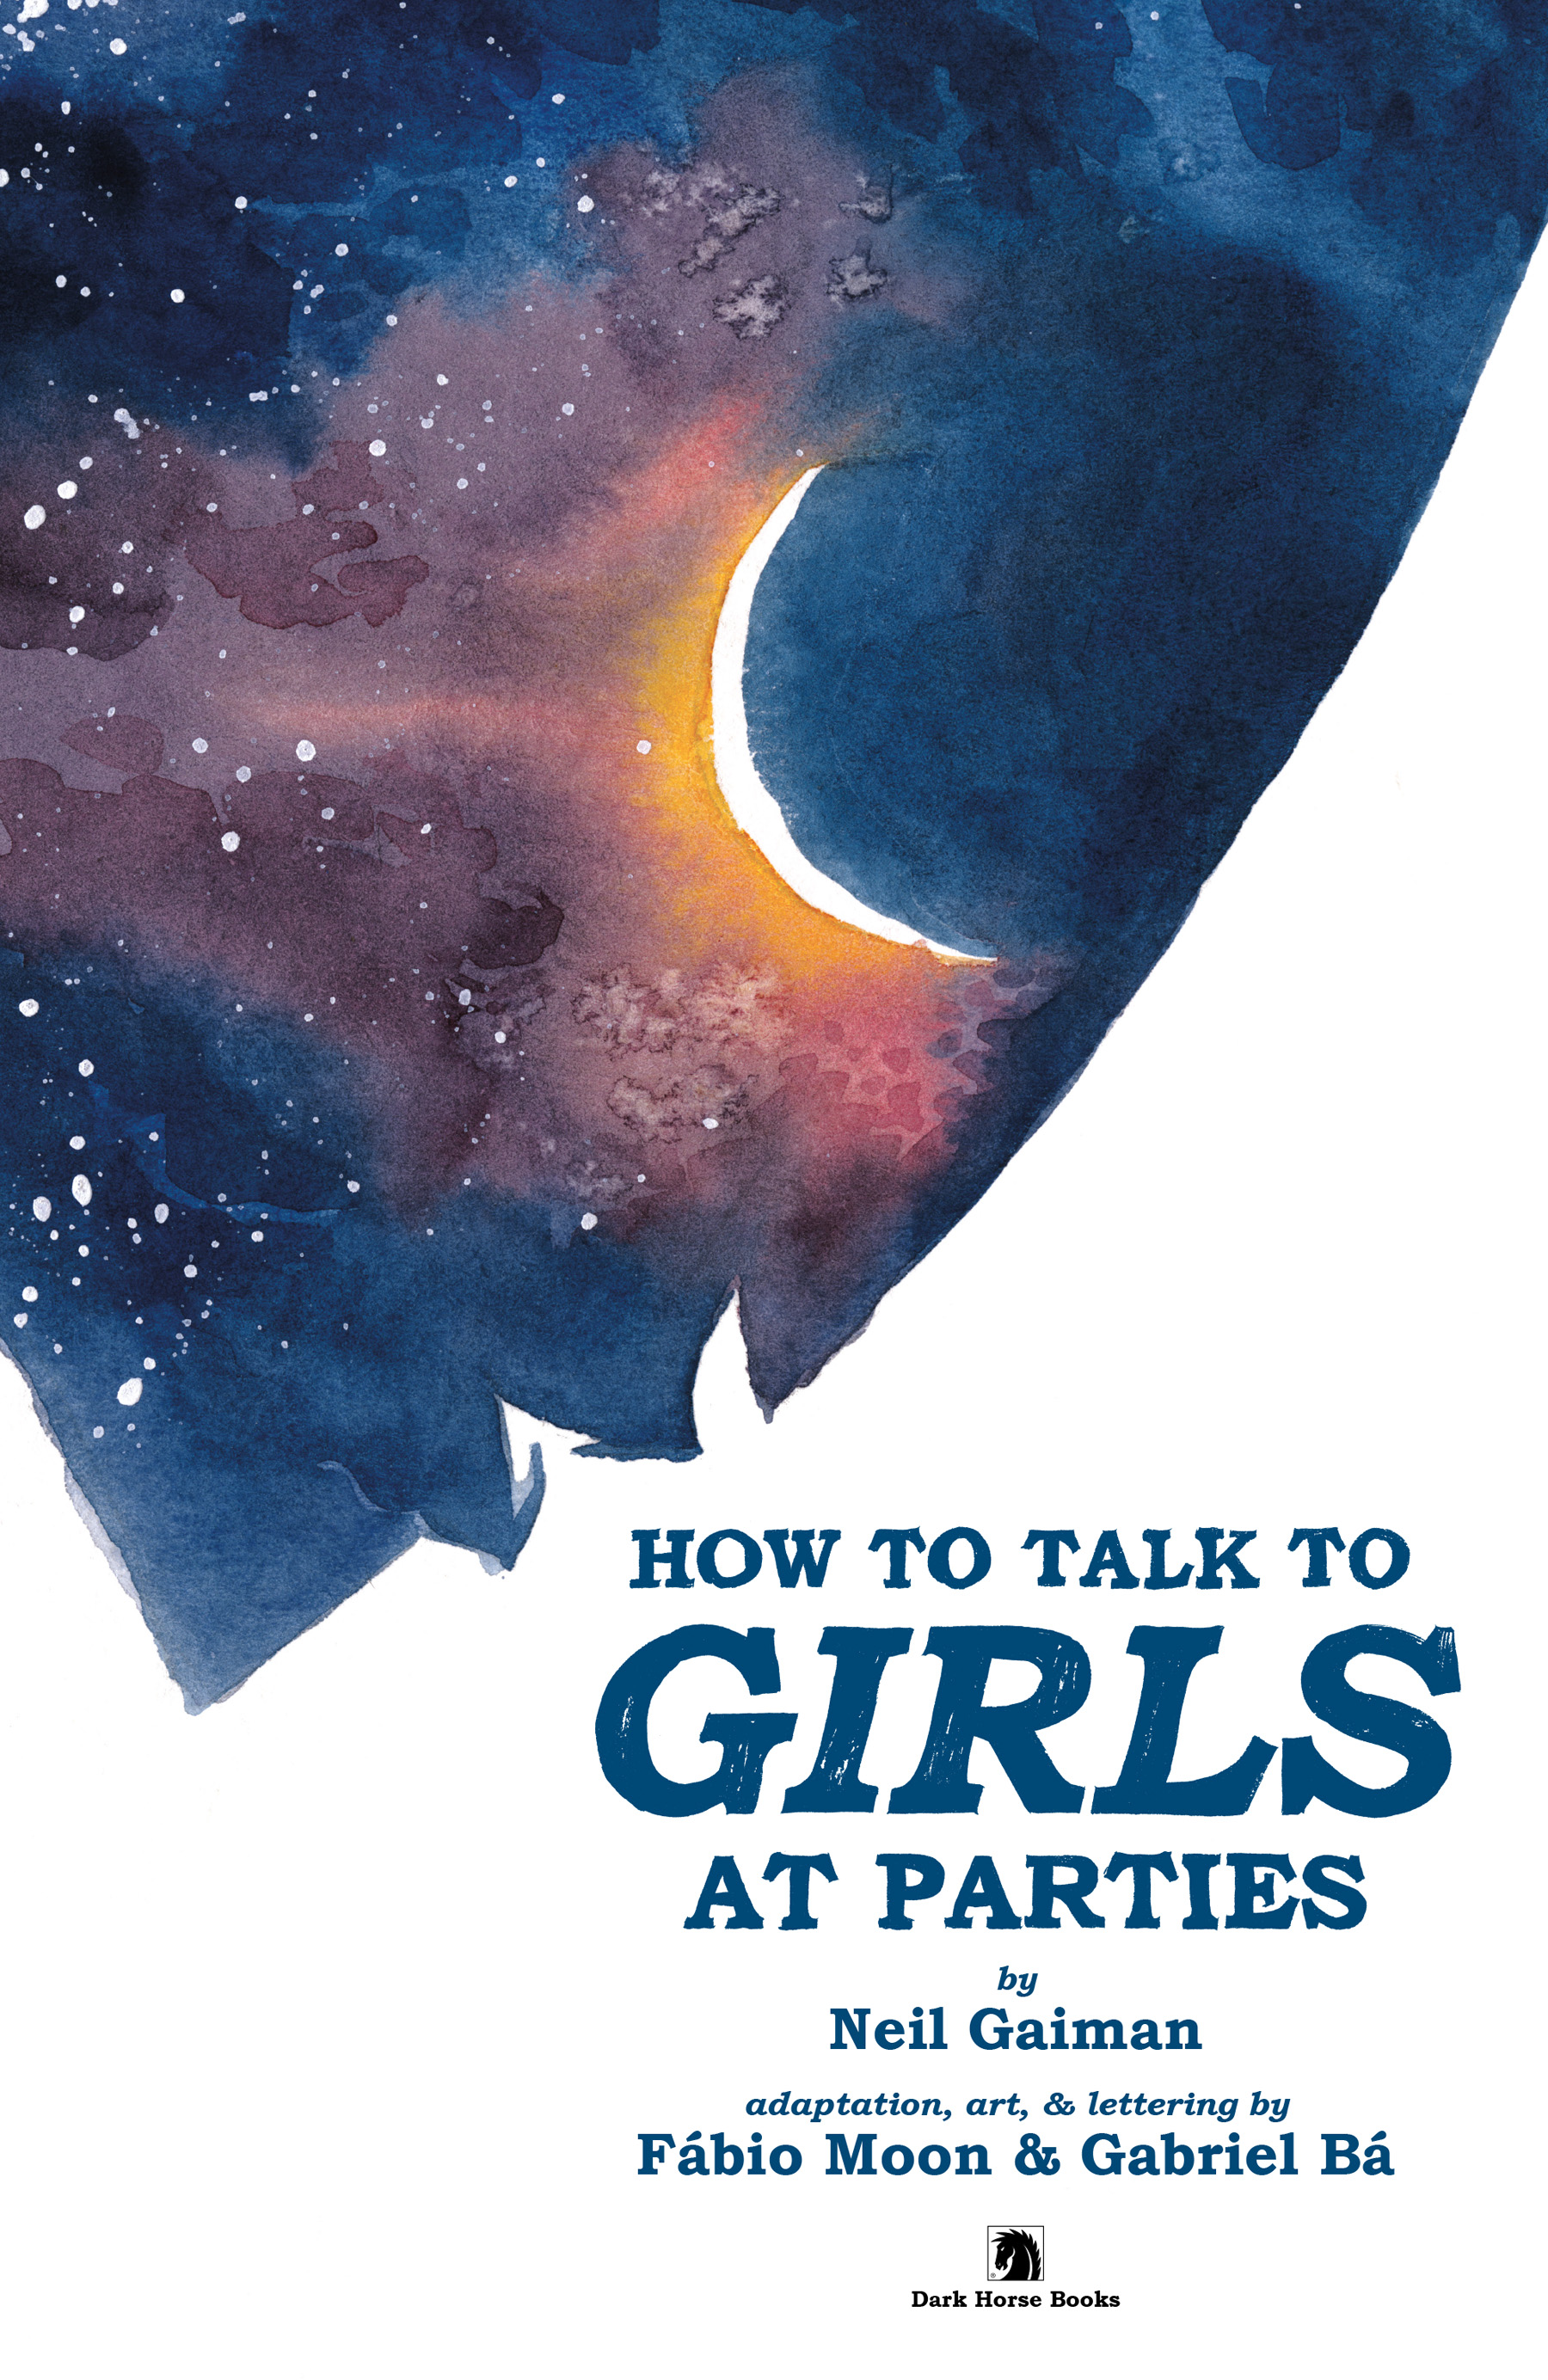 Read online Neil Gaiman’s How To Talk To Girls At Parties comic -  Issue # Full - 2